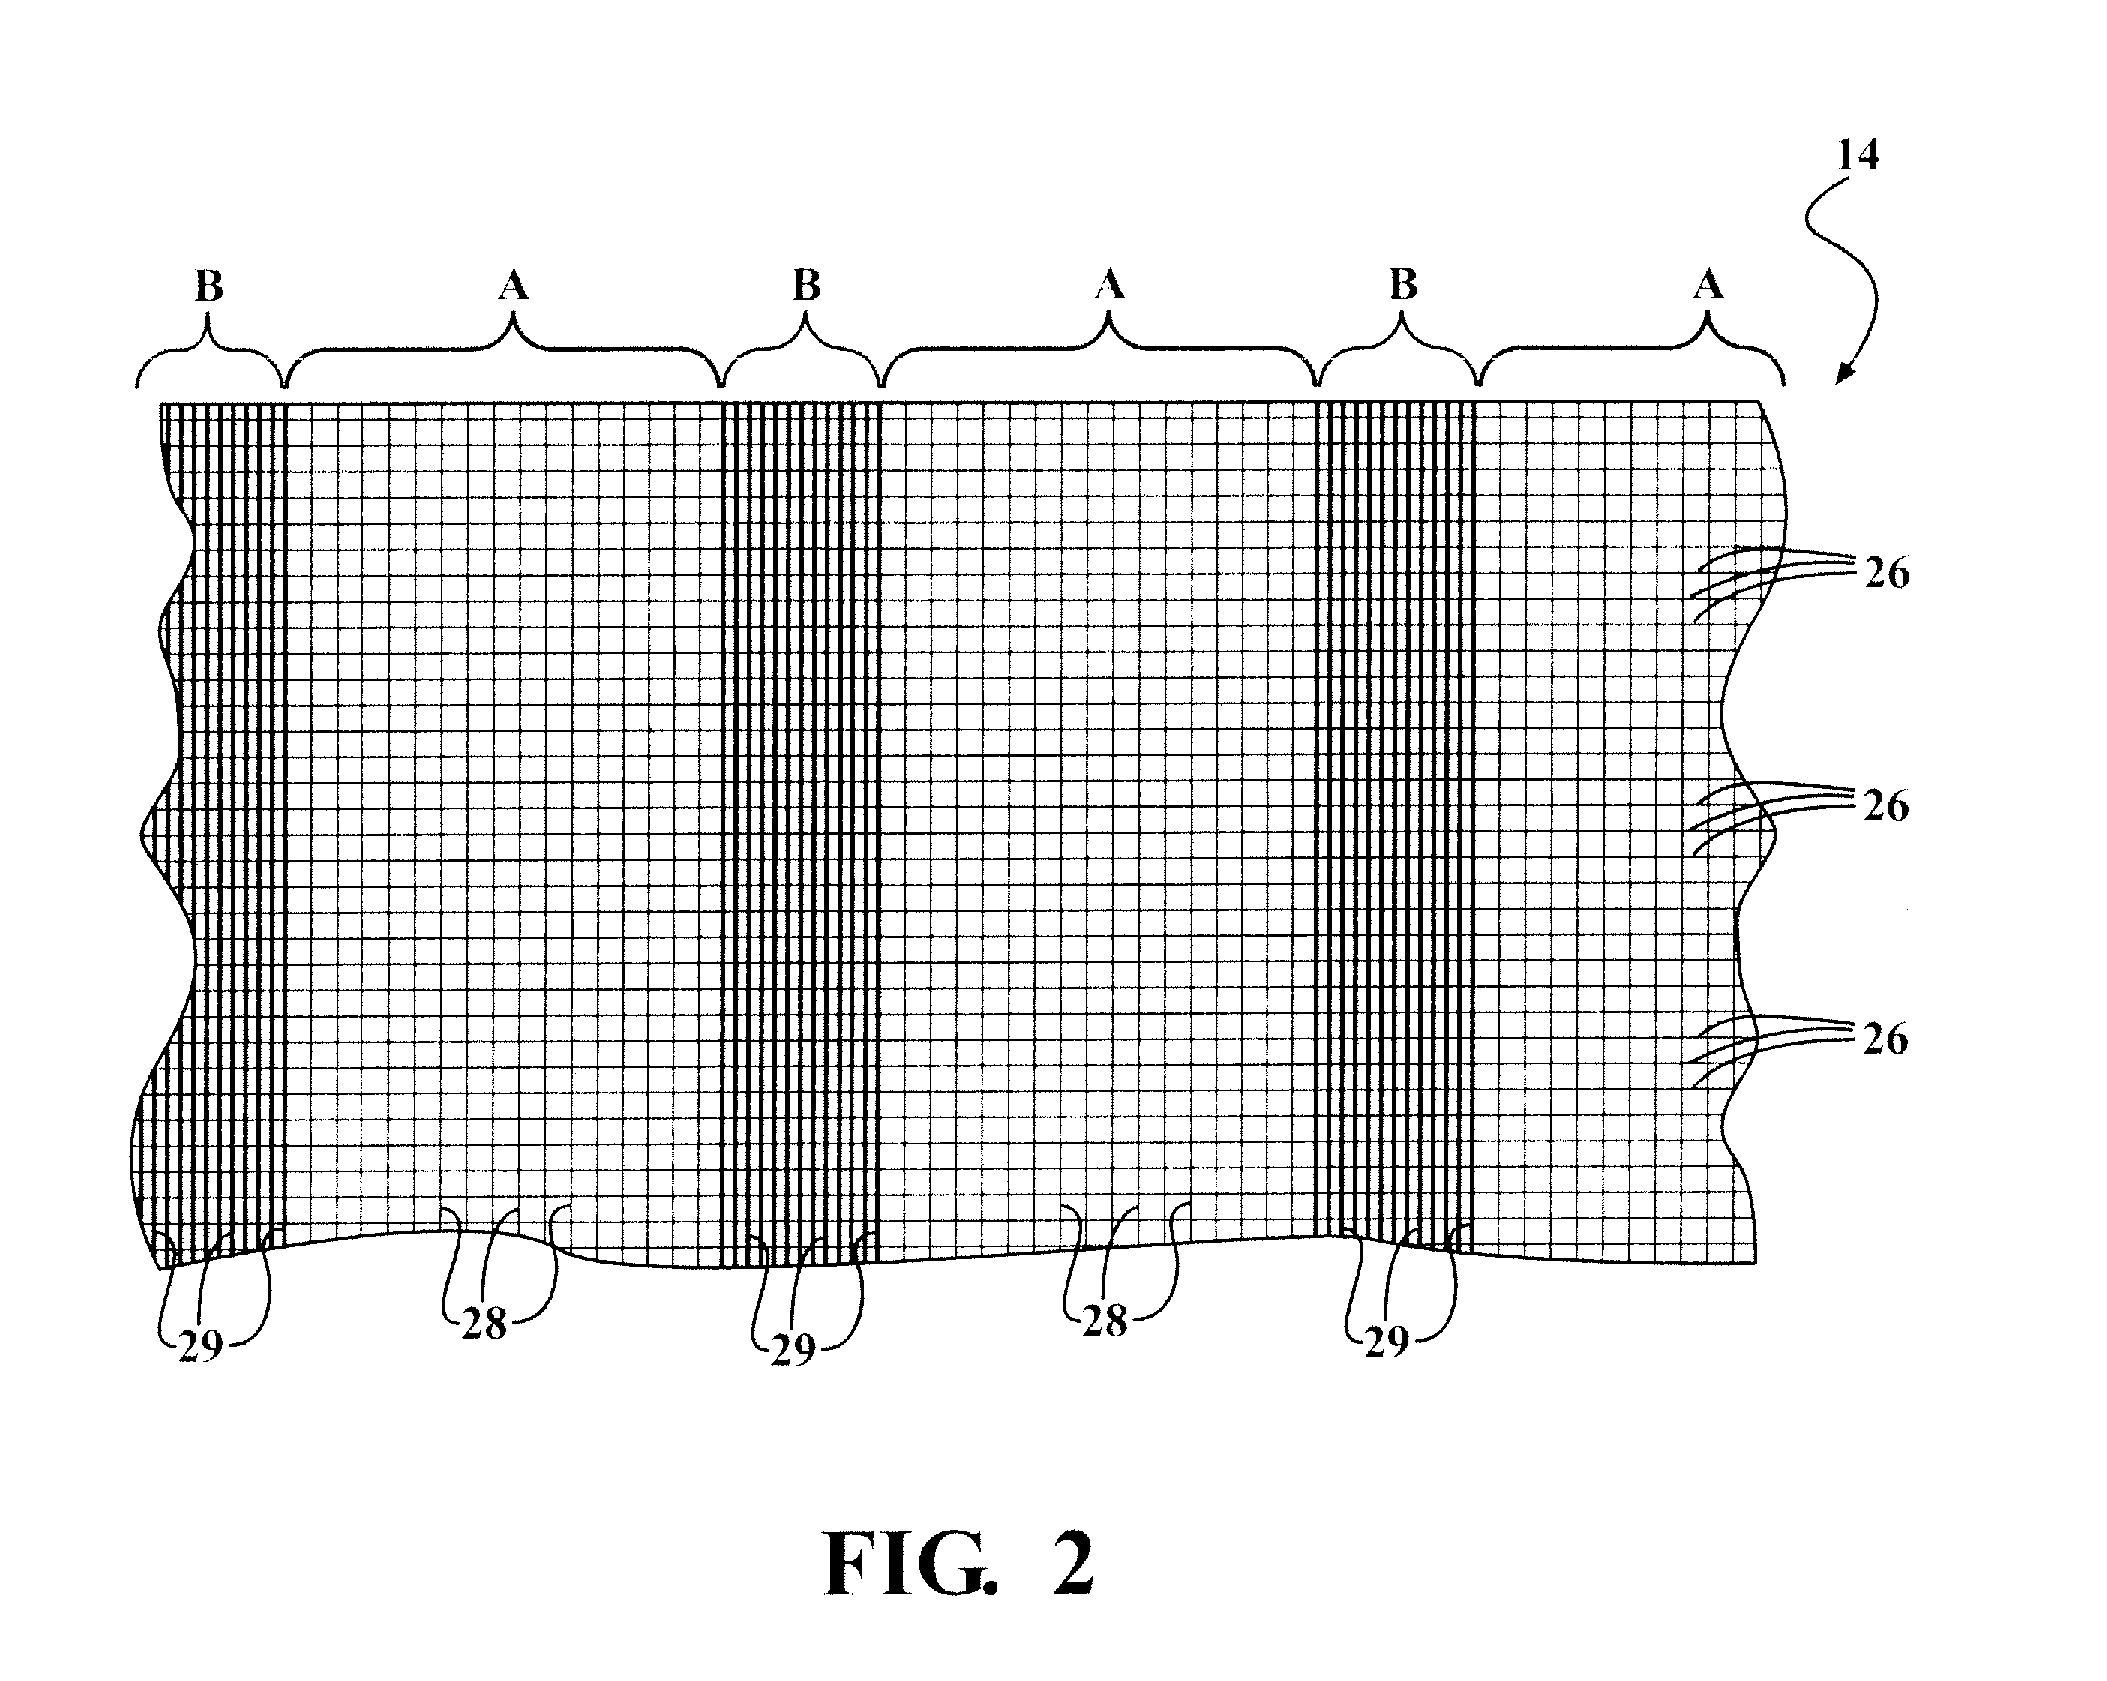 Non-Kinking Self-Wrapping Woven Sleeve and Method of Construction Thereof